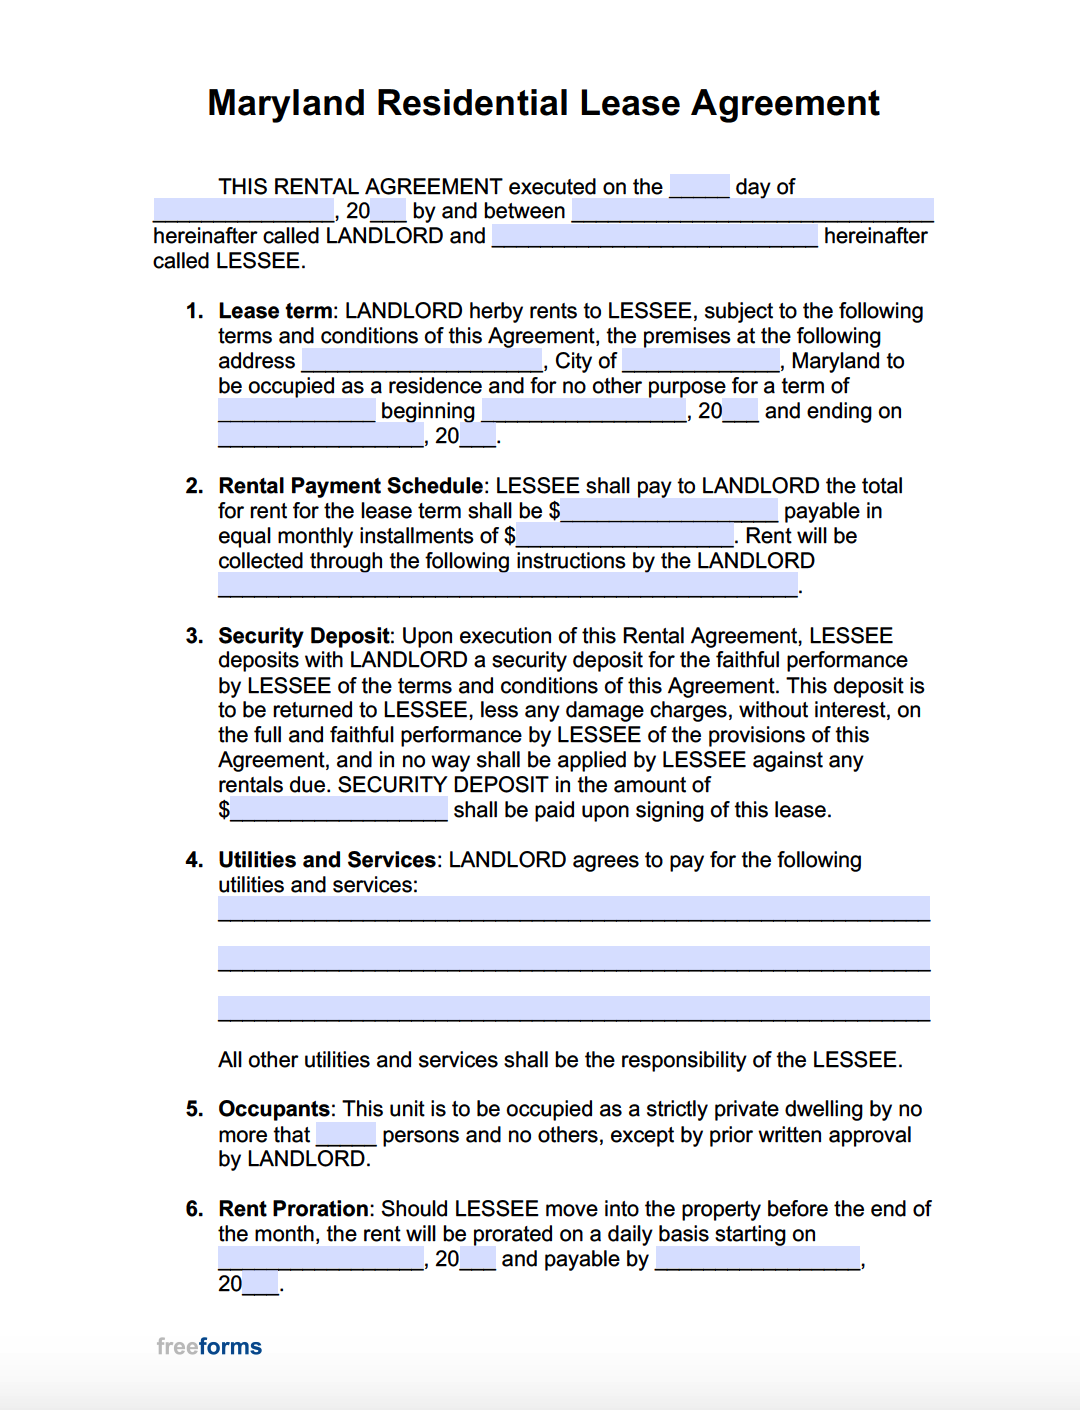 Maryland Residential Lease Agreement Word Printable Form, Templates